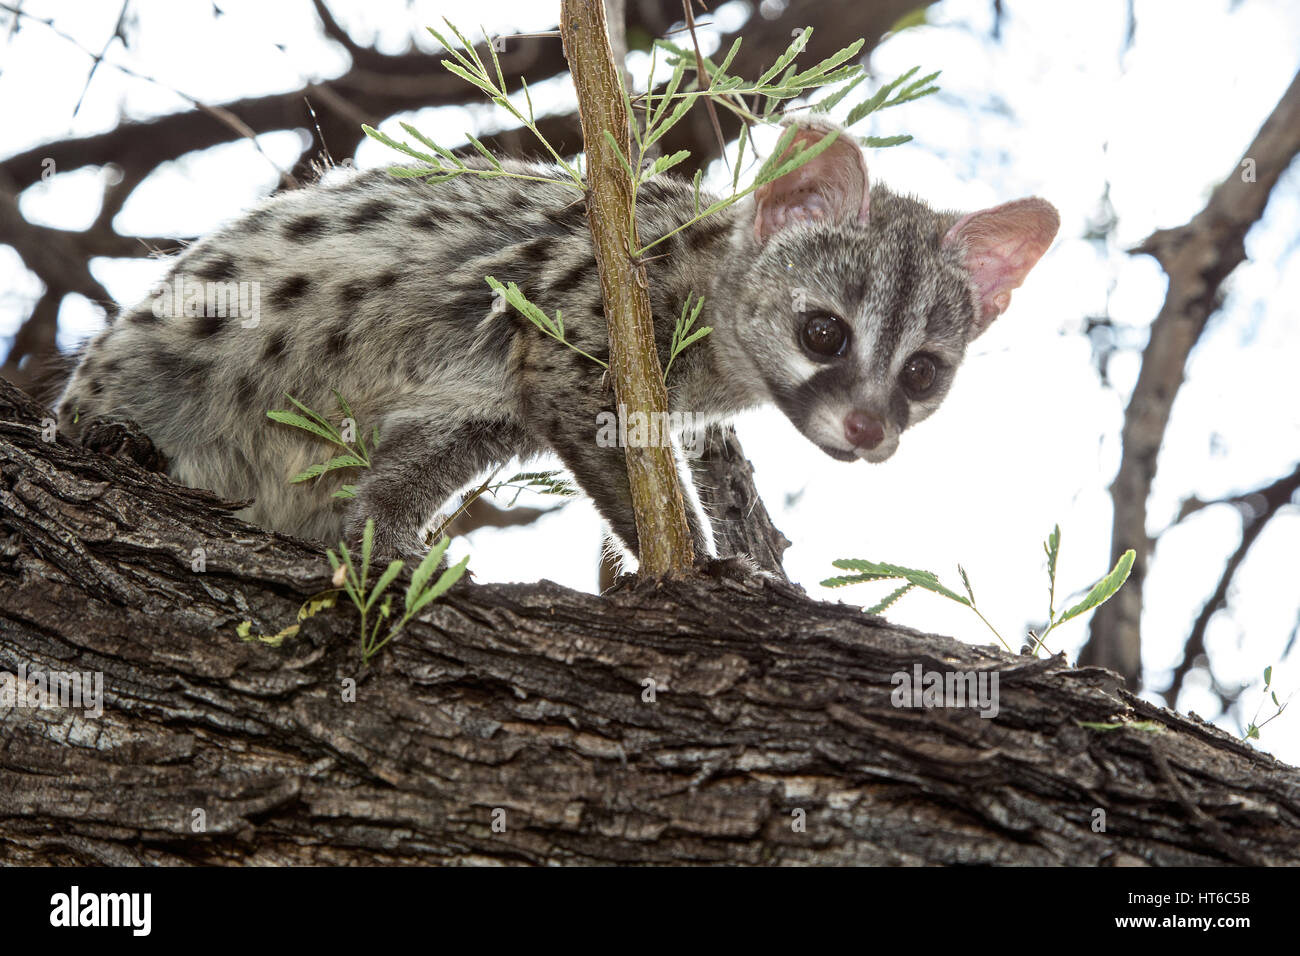 Young Small Spotted Genet on Branch Stock Photo